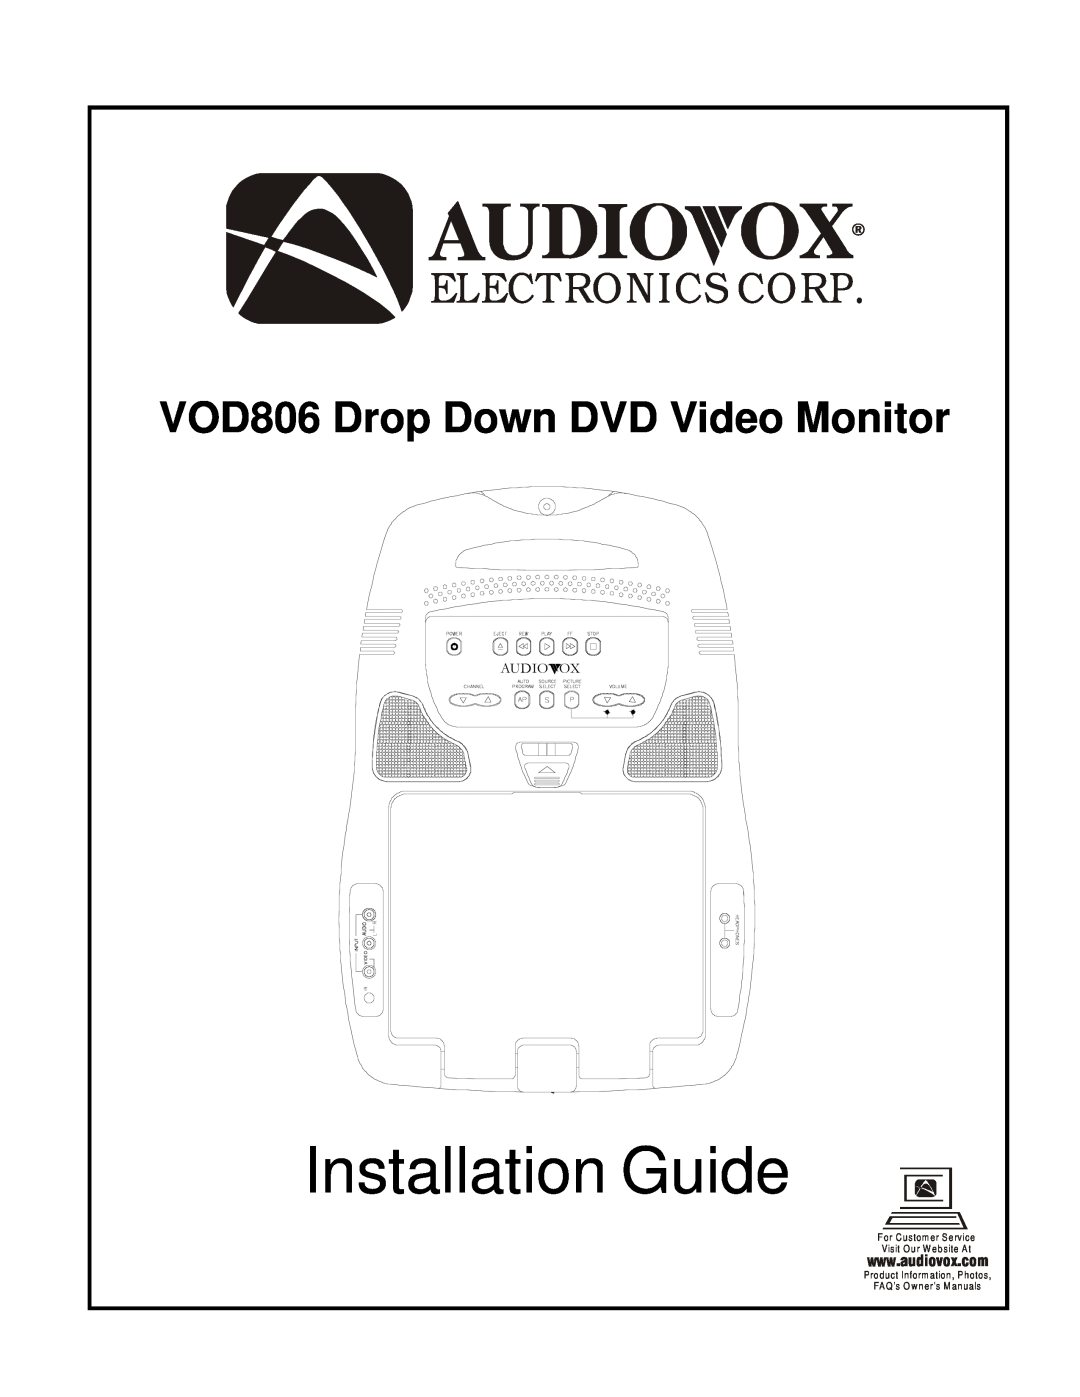 Audiovox owner manual Installation Guide, Electronics Corp, VOD806 Drop Down DVD Video Monitor, audiovox.com, Audioox 